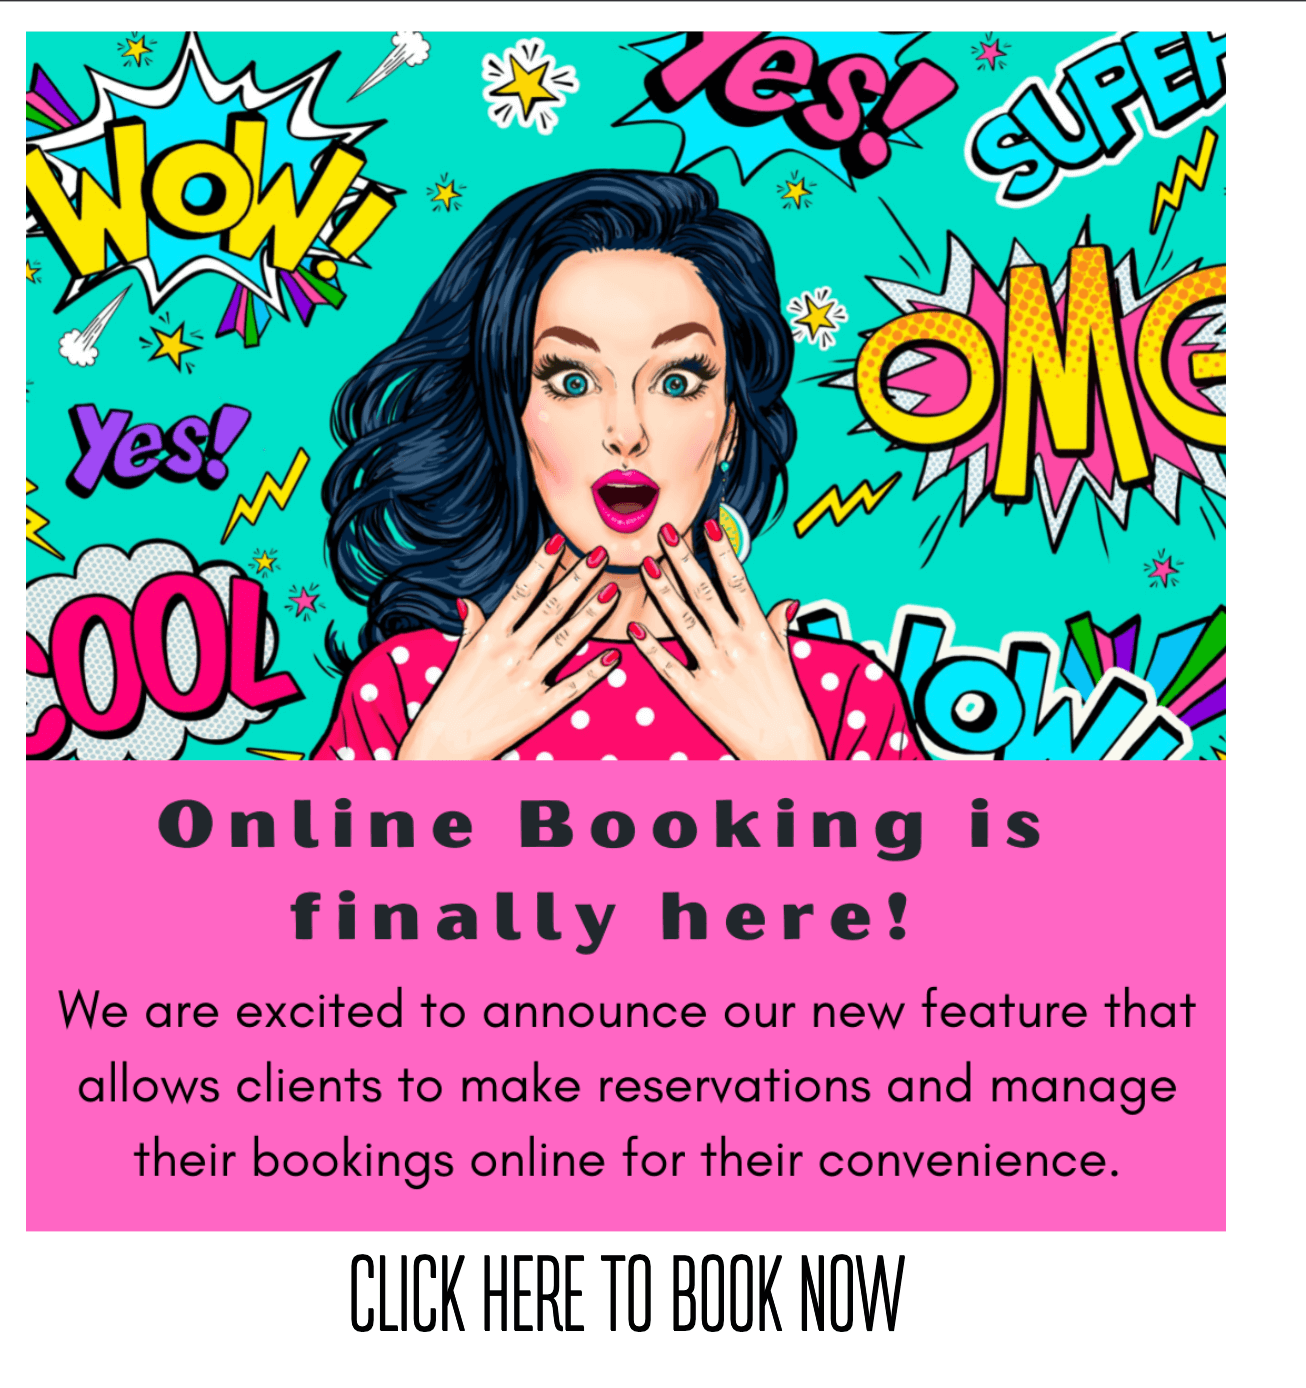 A pop-up from swerve salon promoting their online booking